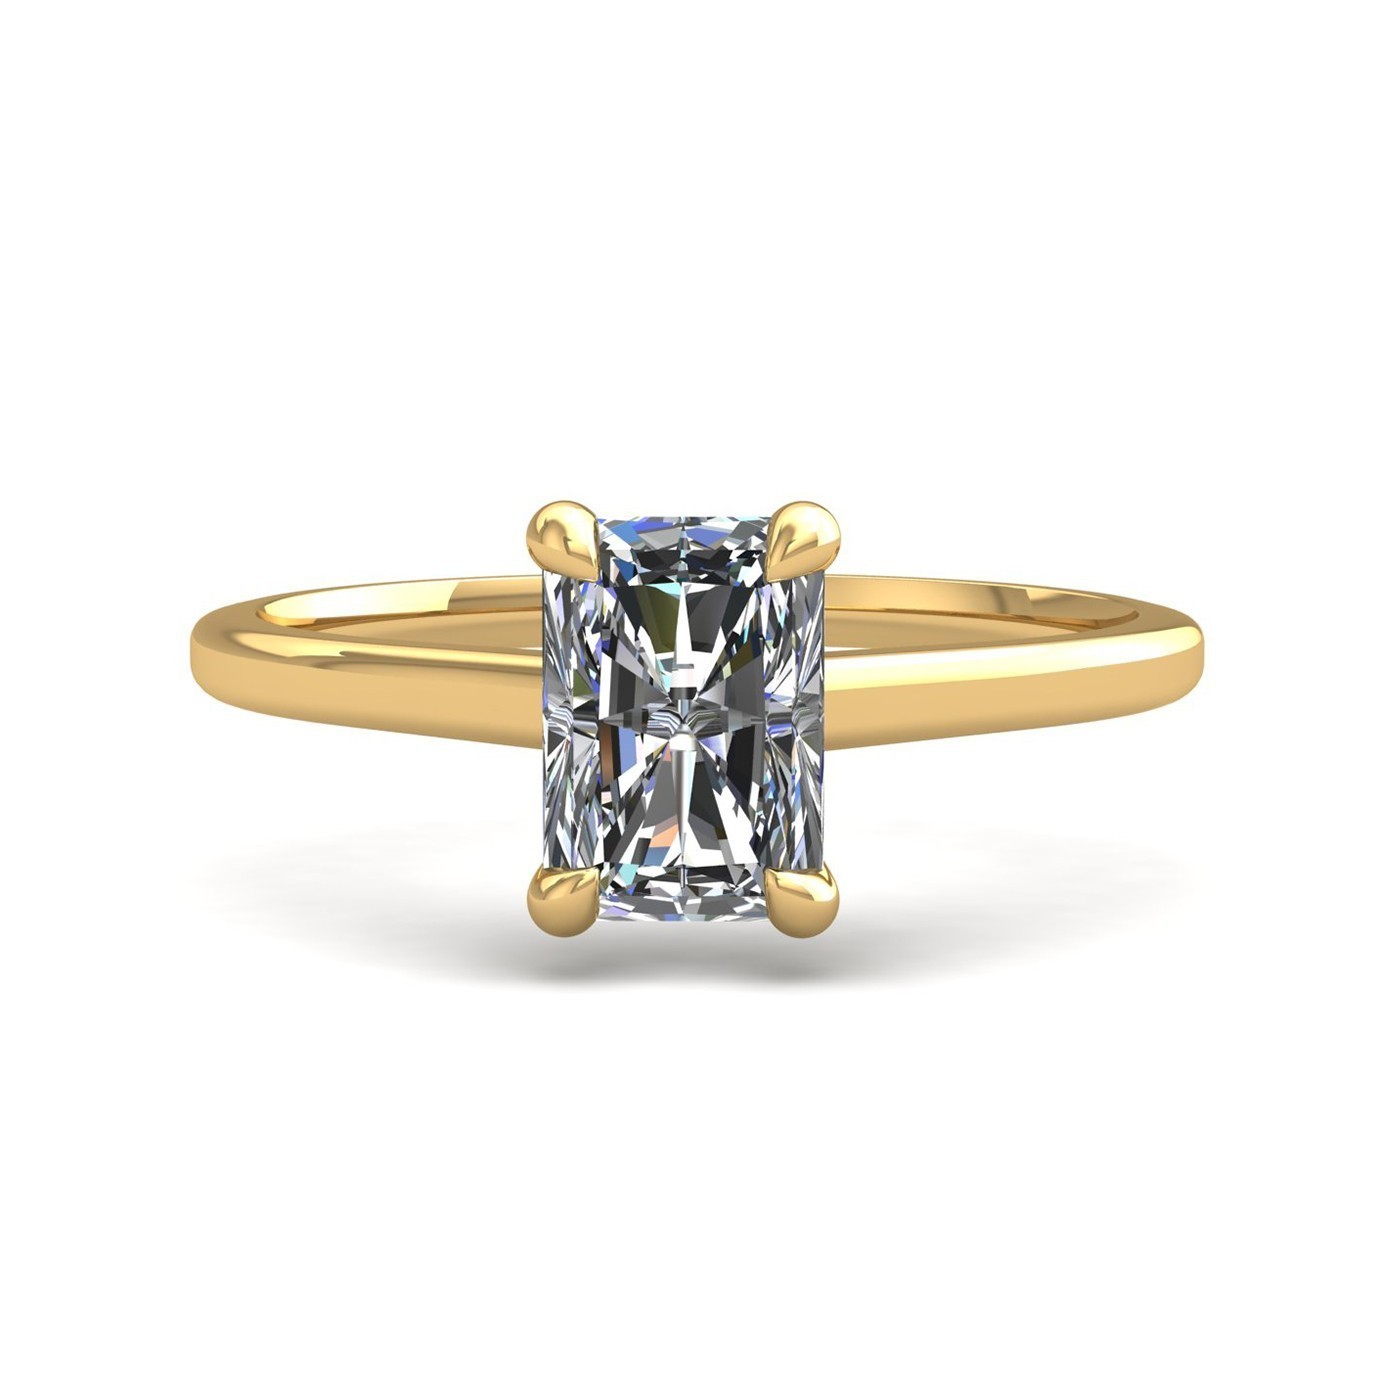 18K YELLOW GOLD 4 PRONGS SOLITAIRE RADIANT CUT DIAMOND ENGAGEMENT RING WITH WHISPER THIN BAND